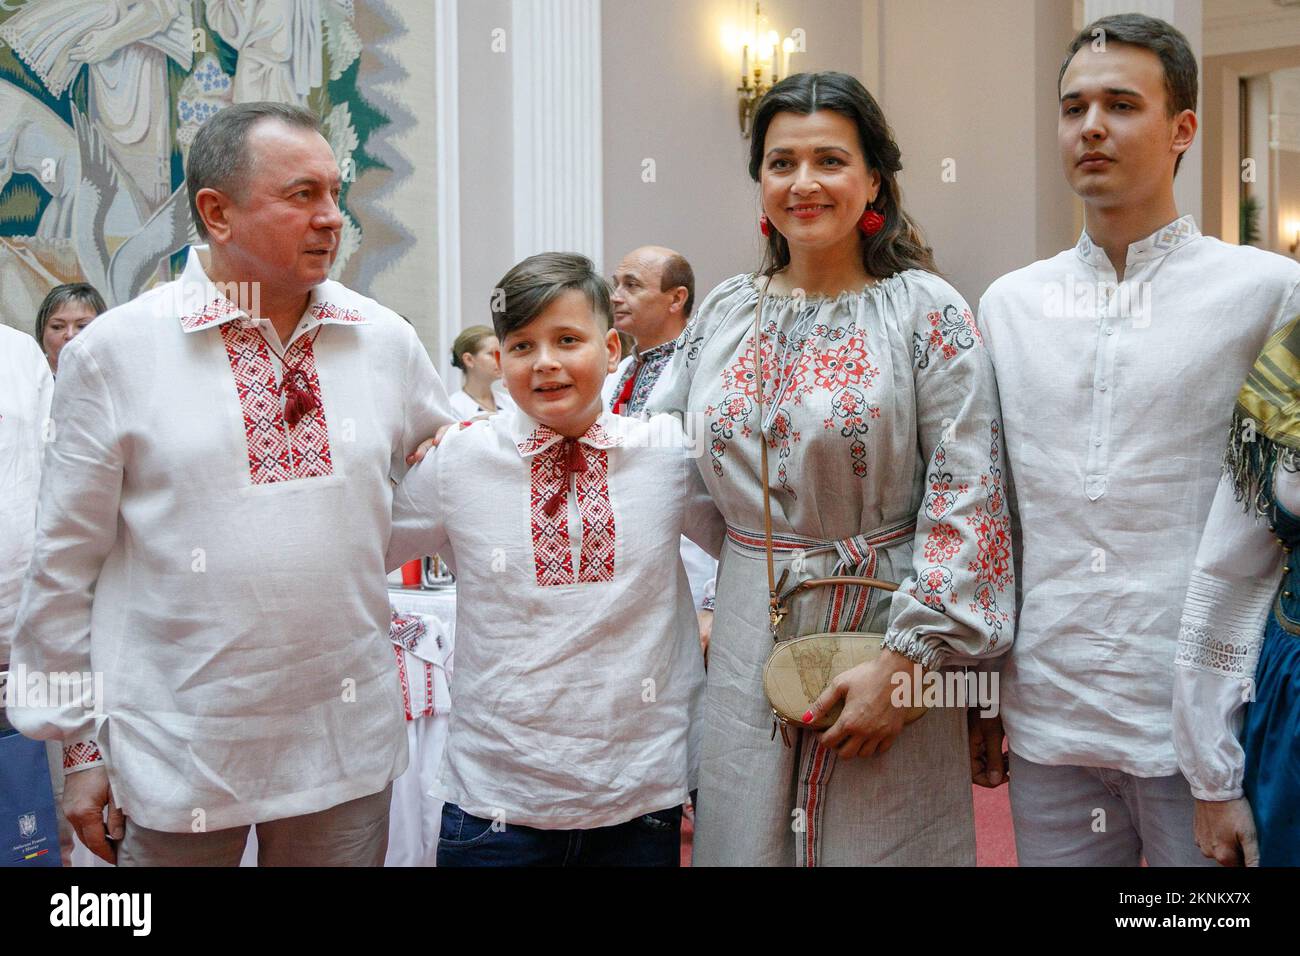 The Minister of Foreign Affairs of the Republic of Belarus Vladimir Makei (or Uladzimir Makiej) wearing vyshyvanka, a traditional Belarusian embroidered shirt smiles near her wife, actress Vera Paljakova-Makej and her son, and their common youngest son during the event called In Belarus Like At Home, organized by his Ministry for foreign diplomats. Vladimir Vladimirovich Makei (or Uladzimir Makiej) died in Minsk on November 26, 2022. He was 64 years old. There is no information that he had a chronic illness. Belarusian authorities did not state his cause of death. Makei served as the Minister Stock Photo